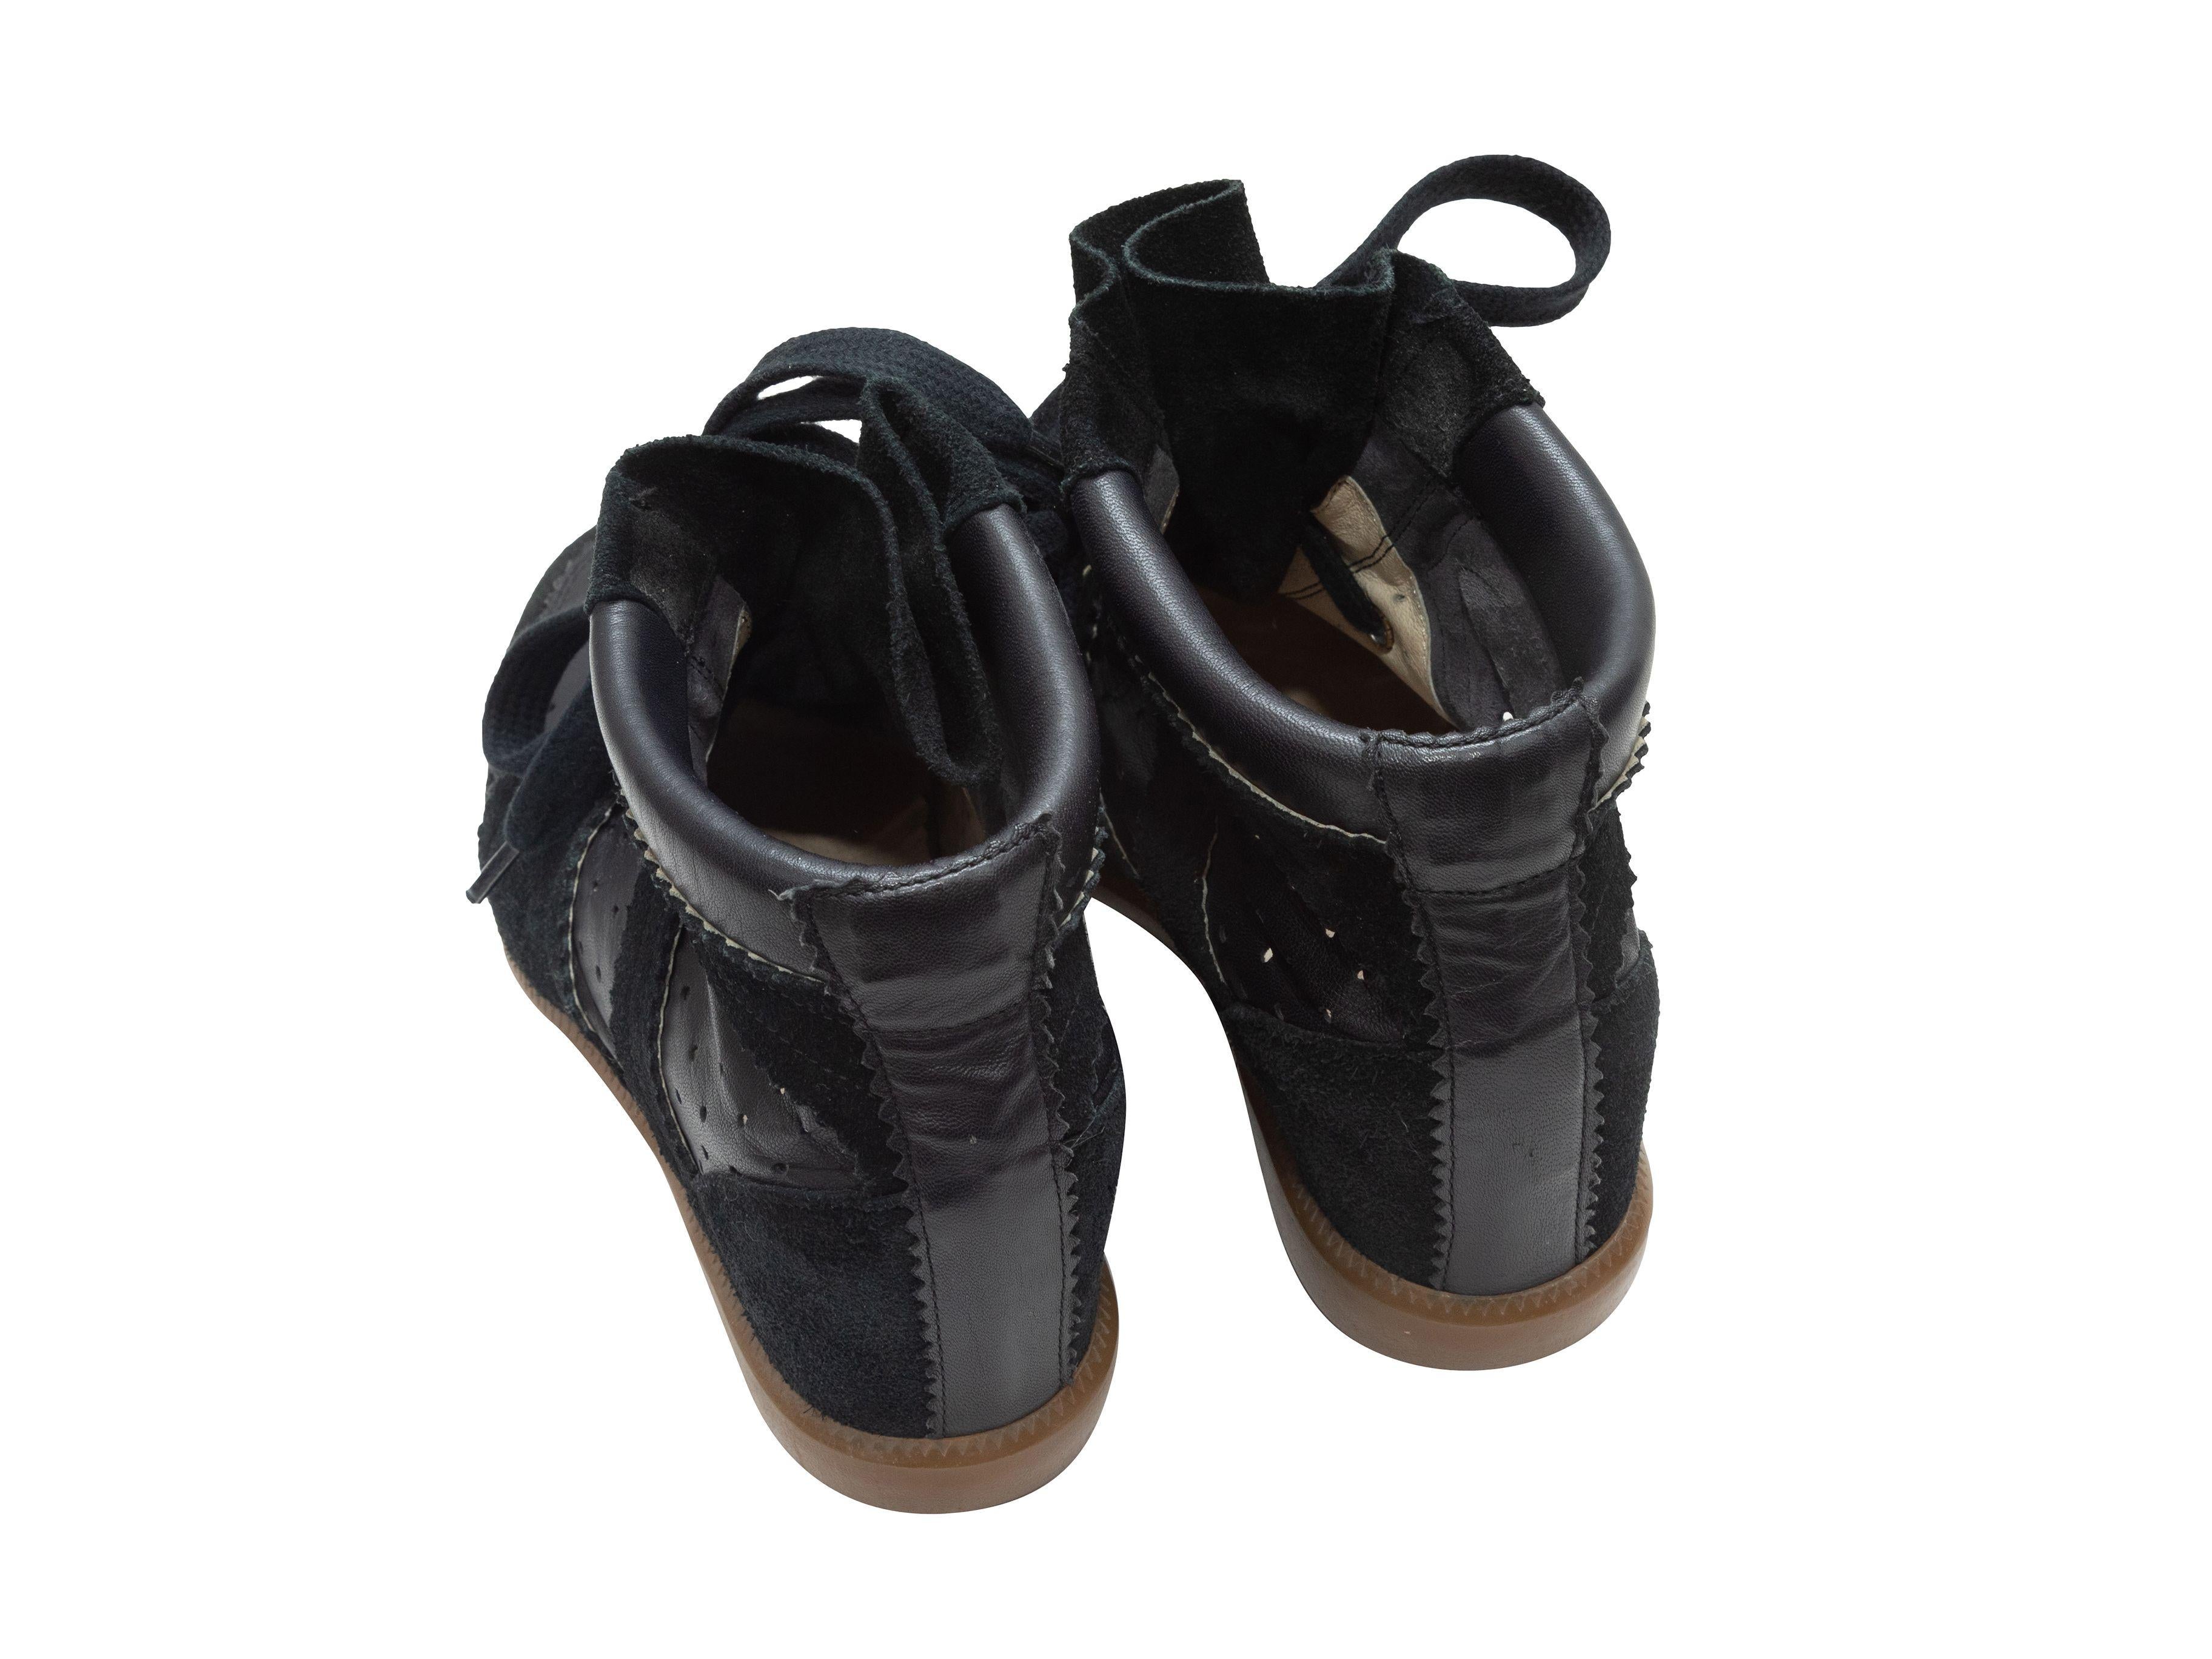 Isabel Marant Black Suede & Leather Wedge Sneakers In Good Condition For Sale In New York, NY